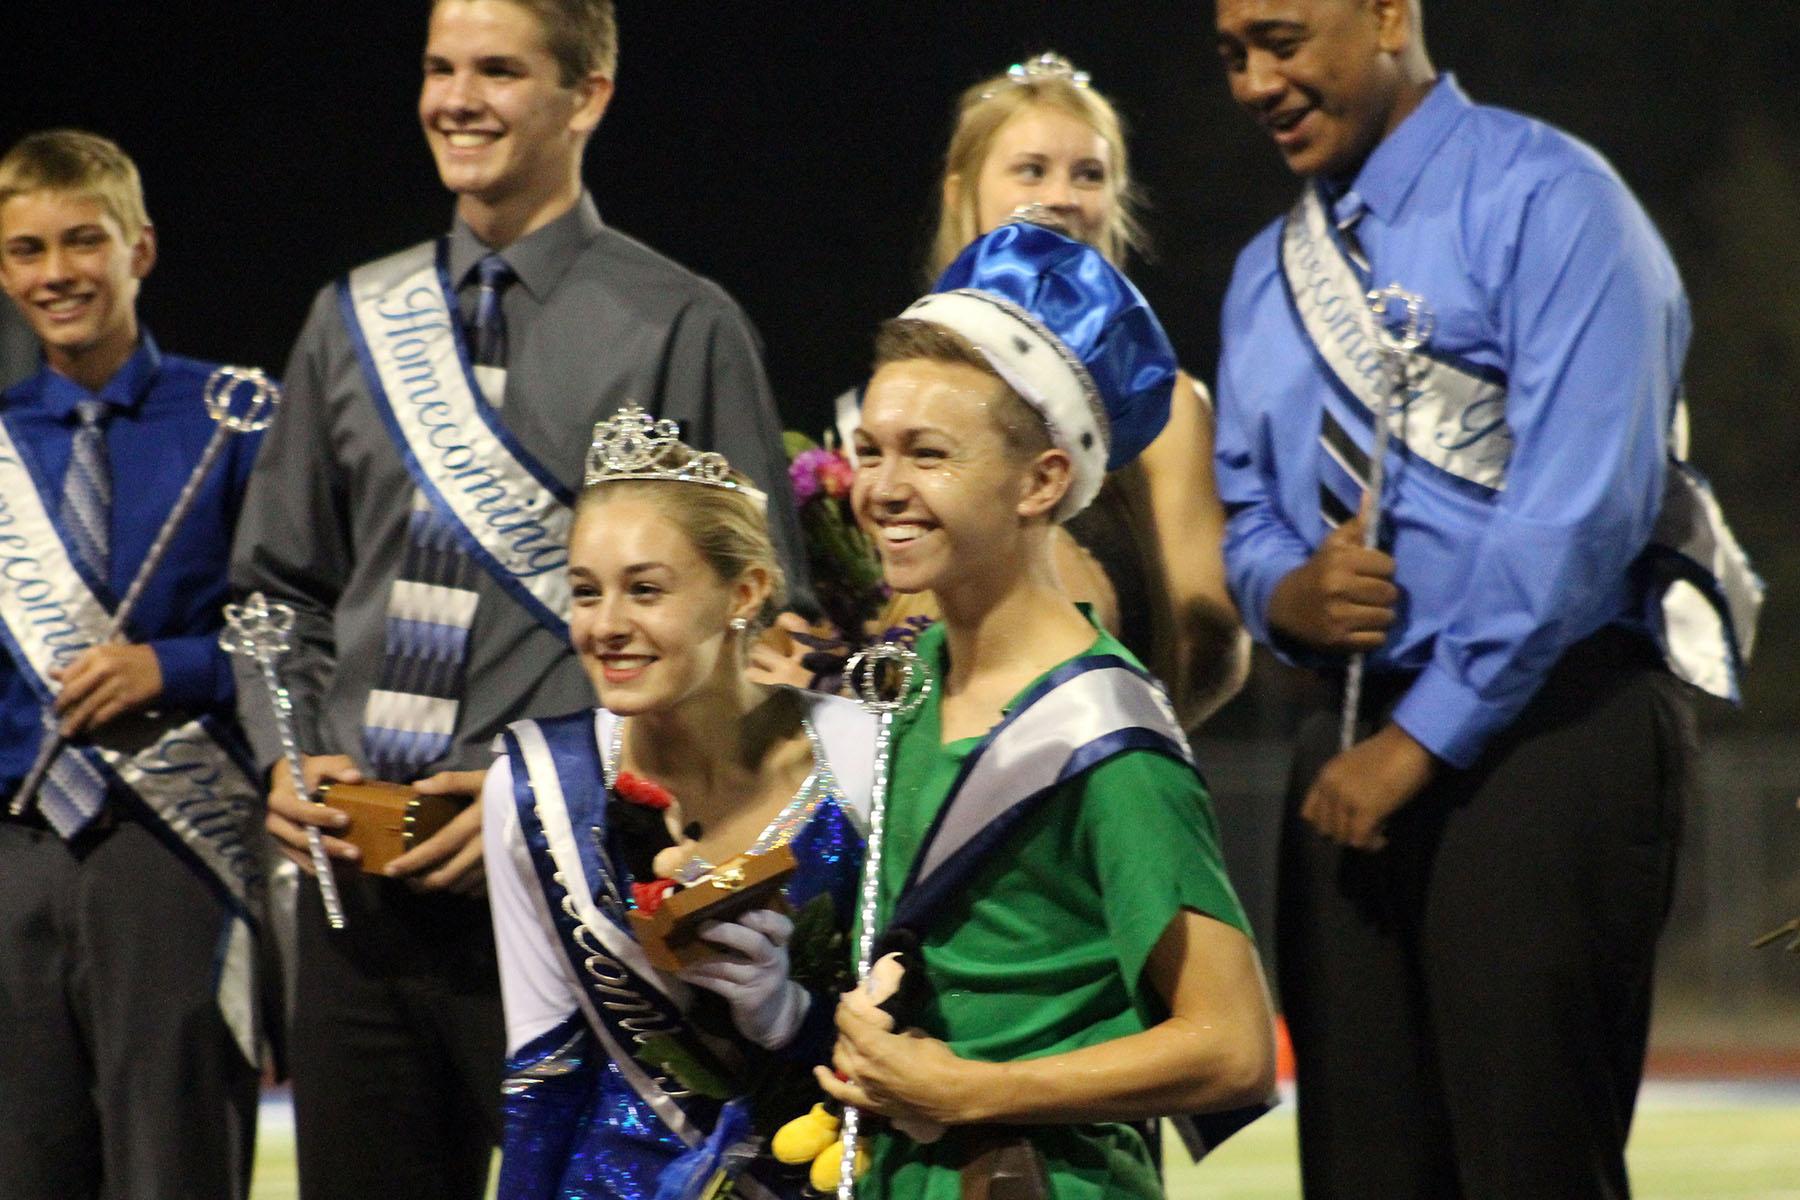 King+and+Queen+of+Rocklin